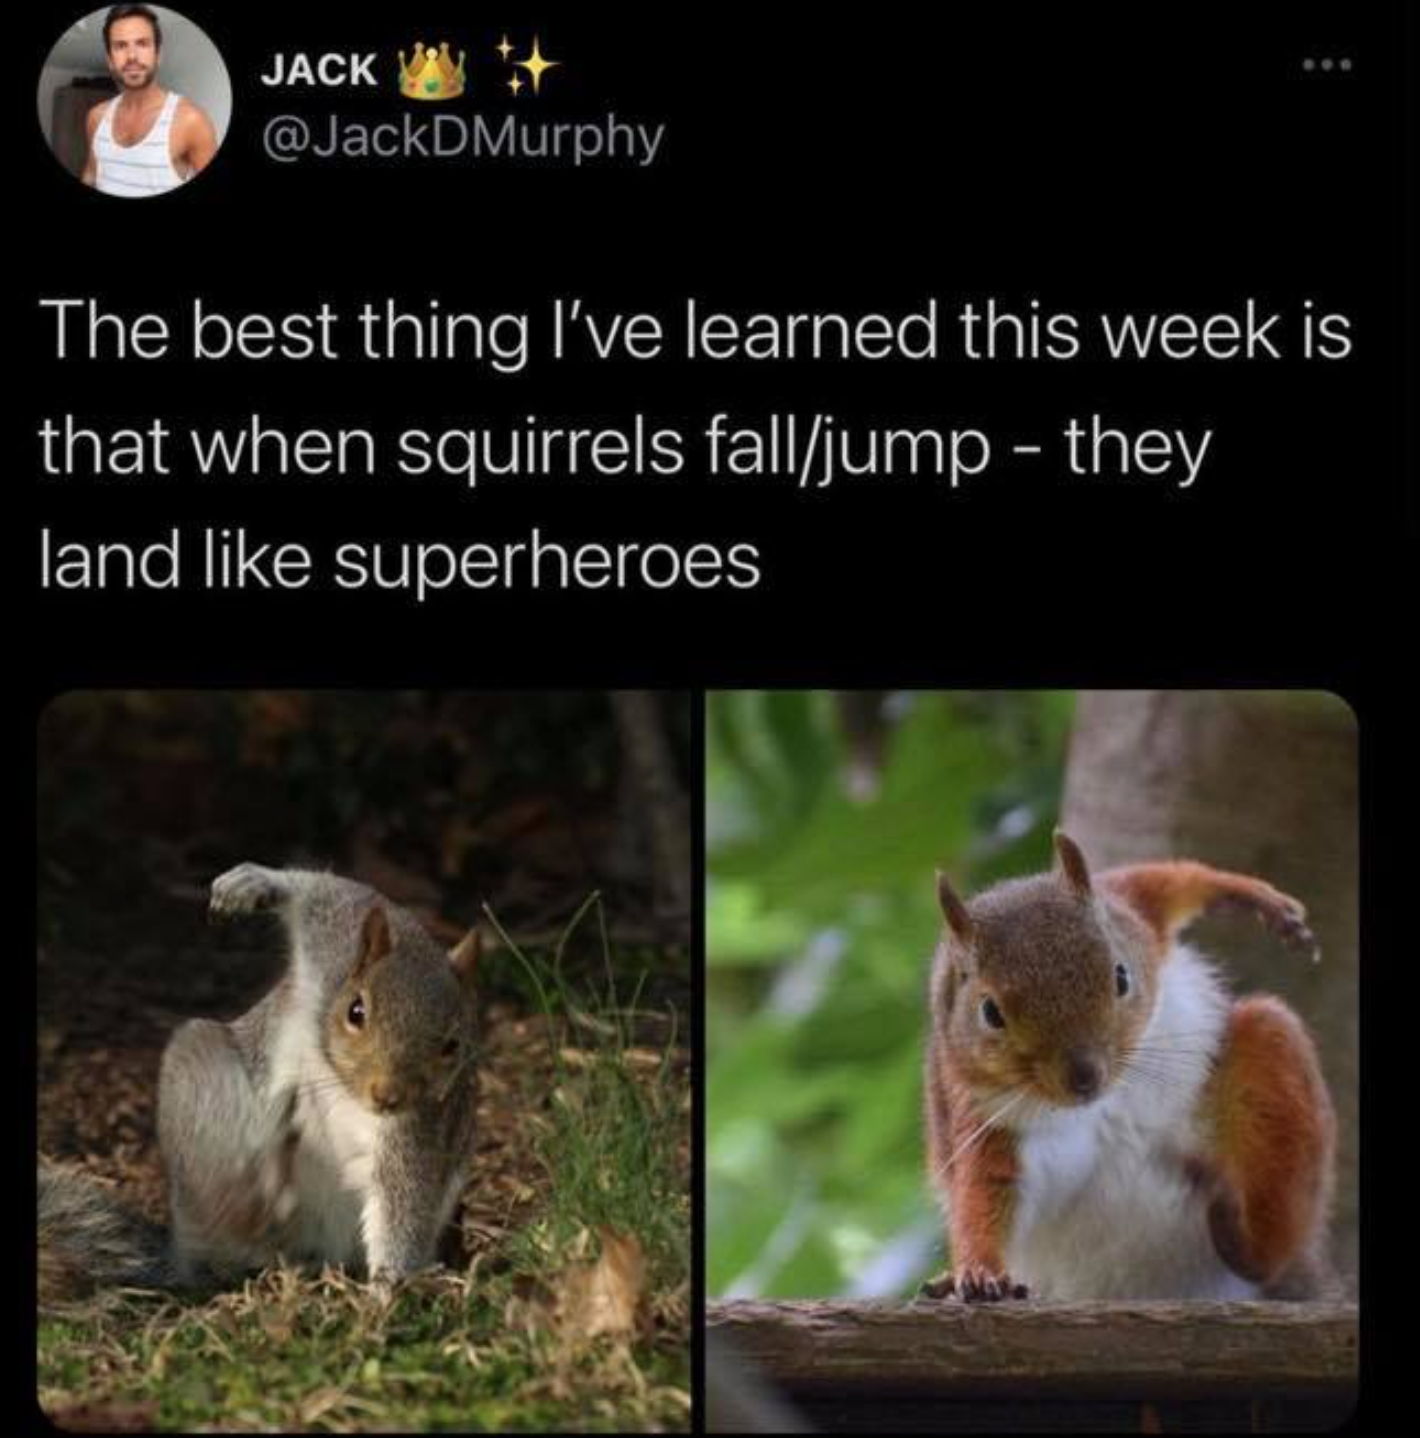 Jack The best thing I've learned this week is that when squirrels falljump they land superheroes